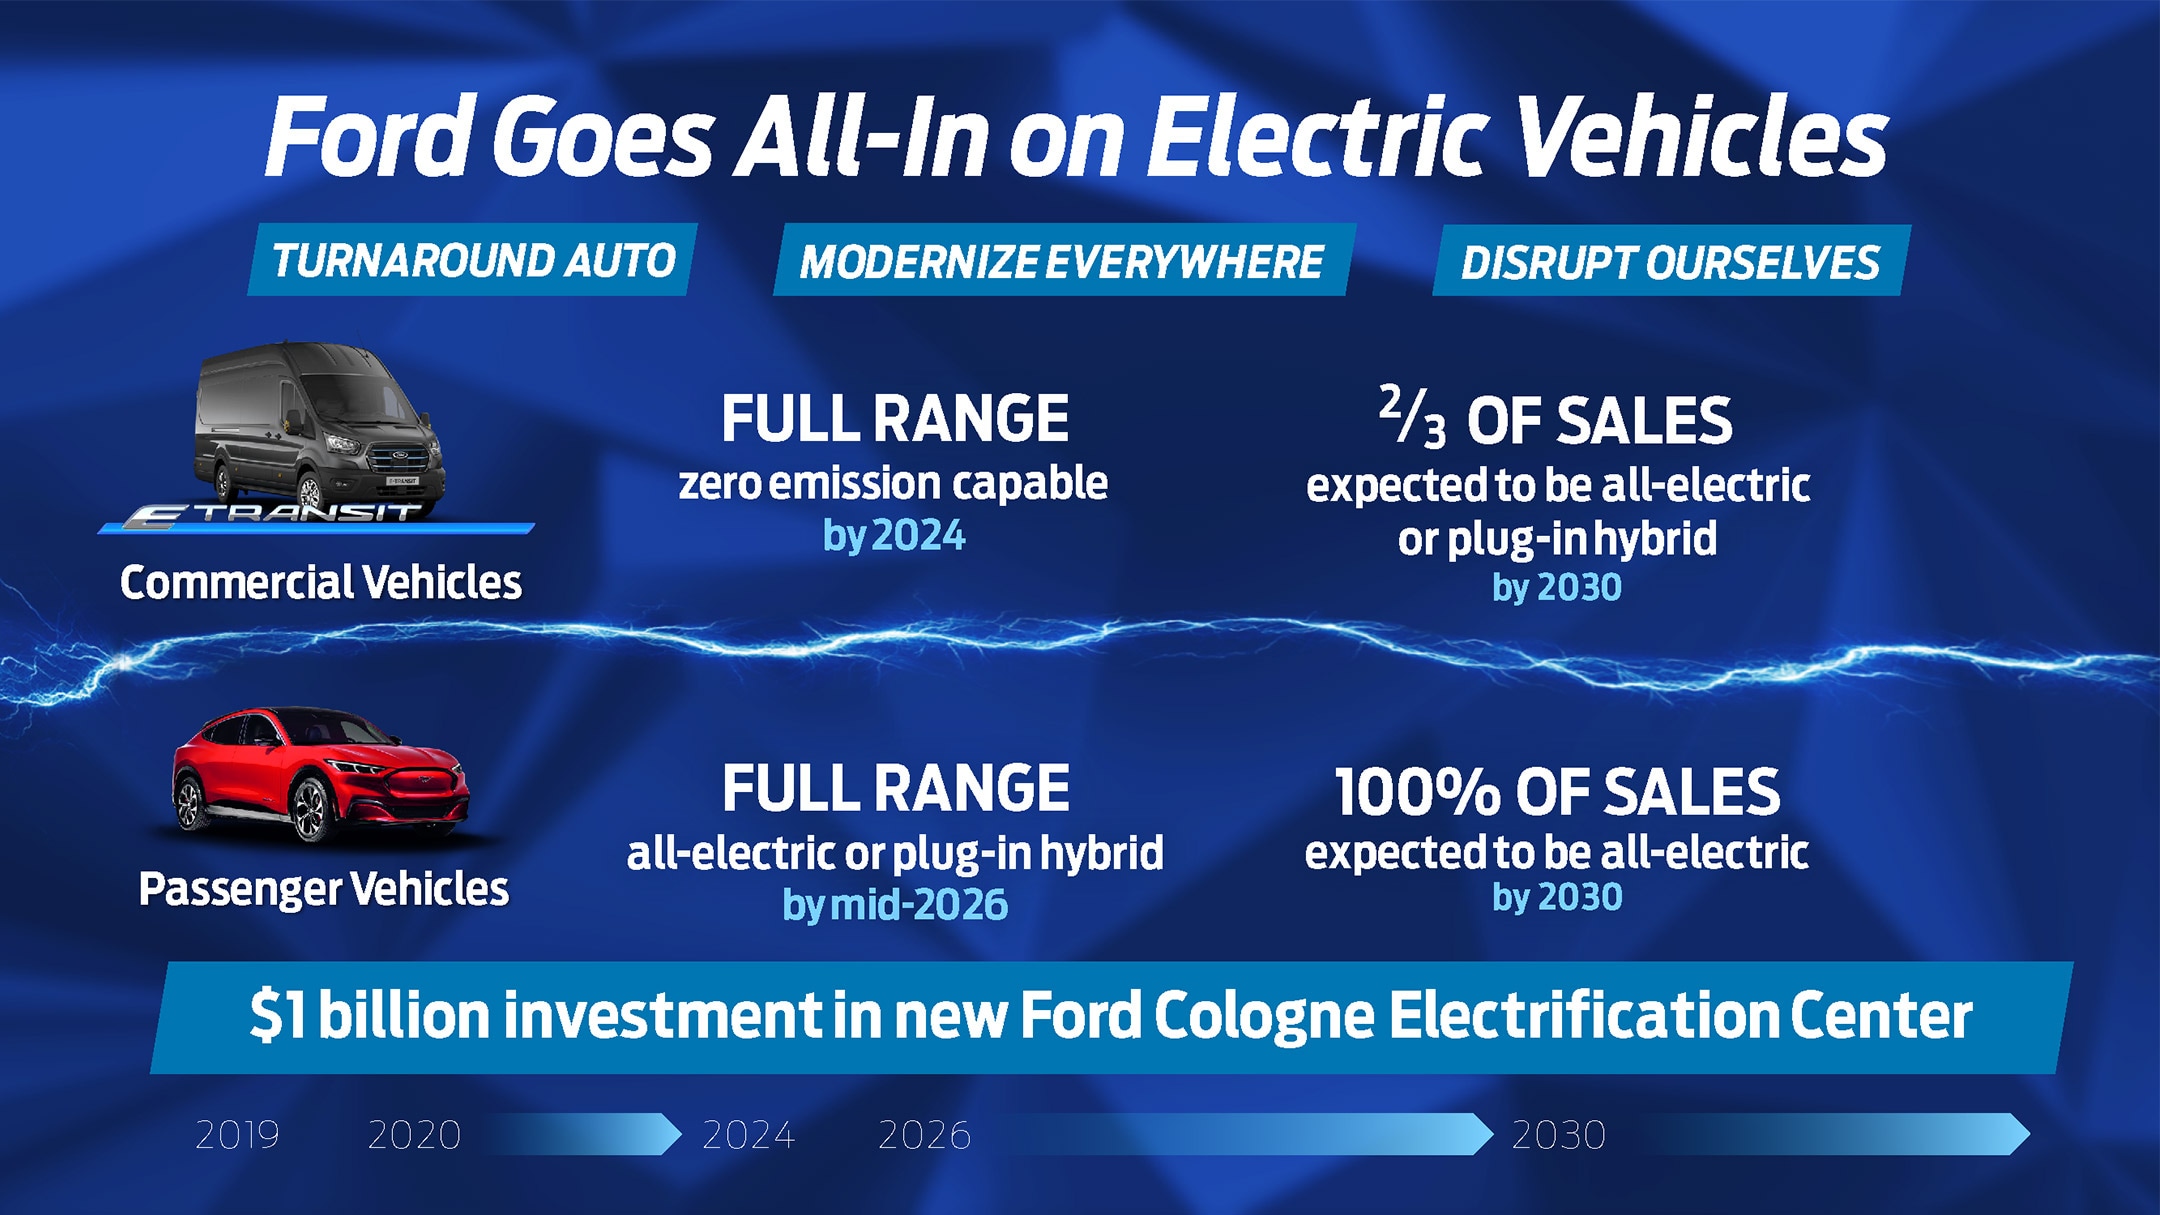 Ford Goes All-In on Electric Vehicles